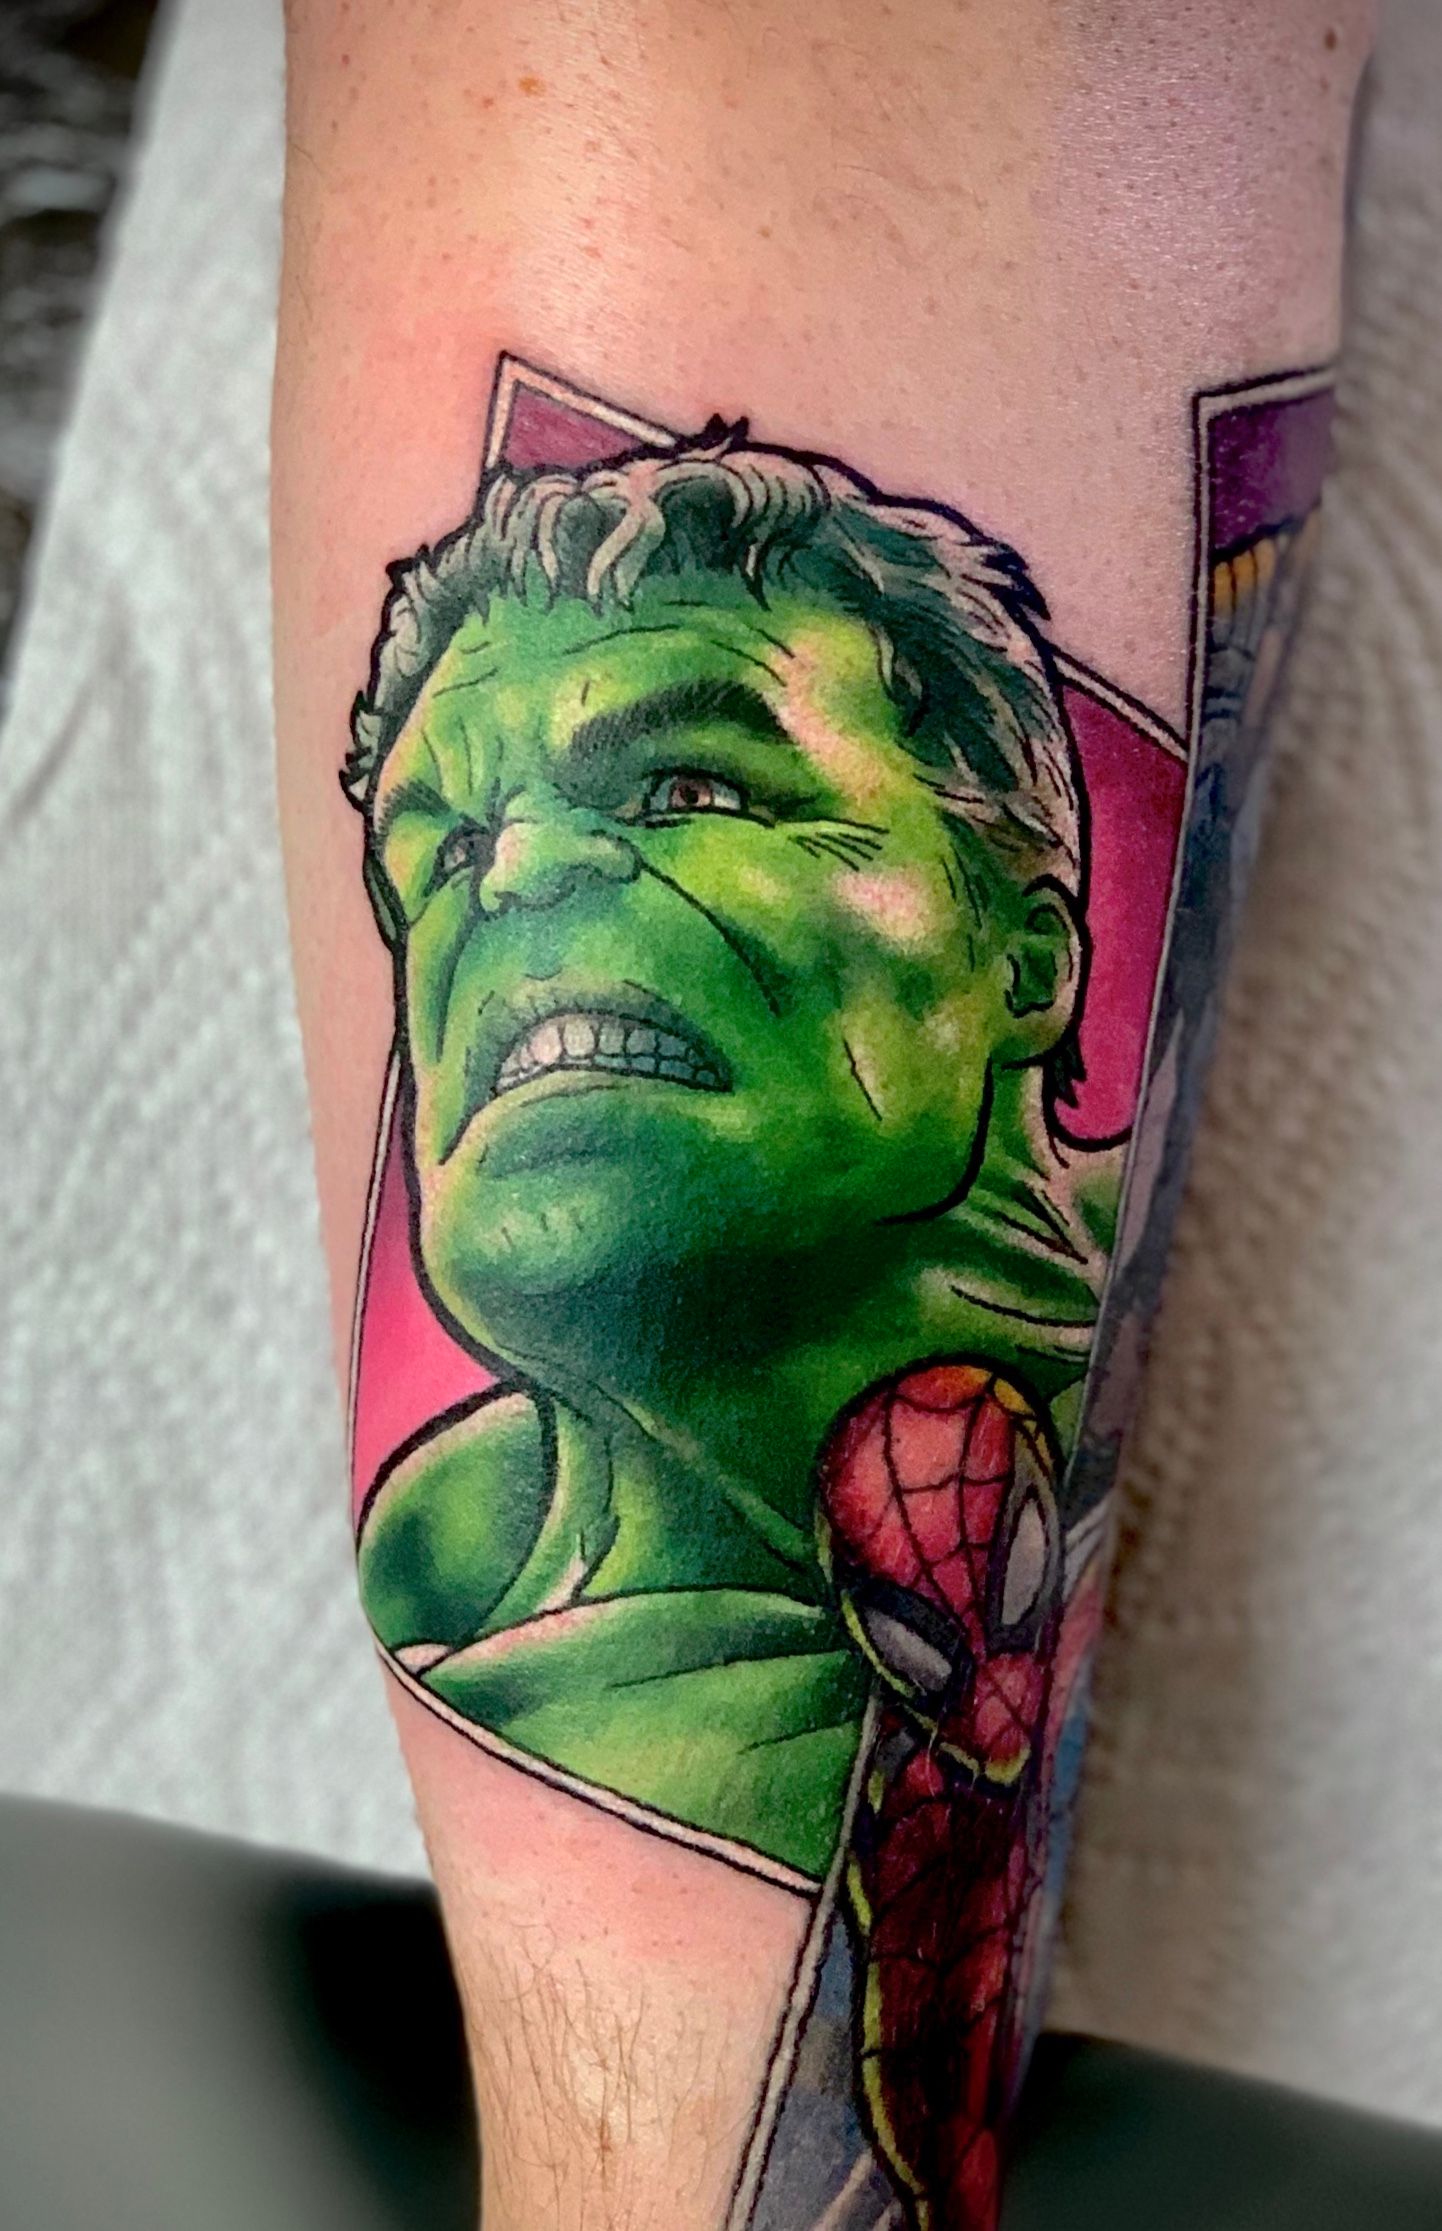 Client Story: Five Regretted Cinematic Tattoos, One Solution